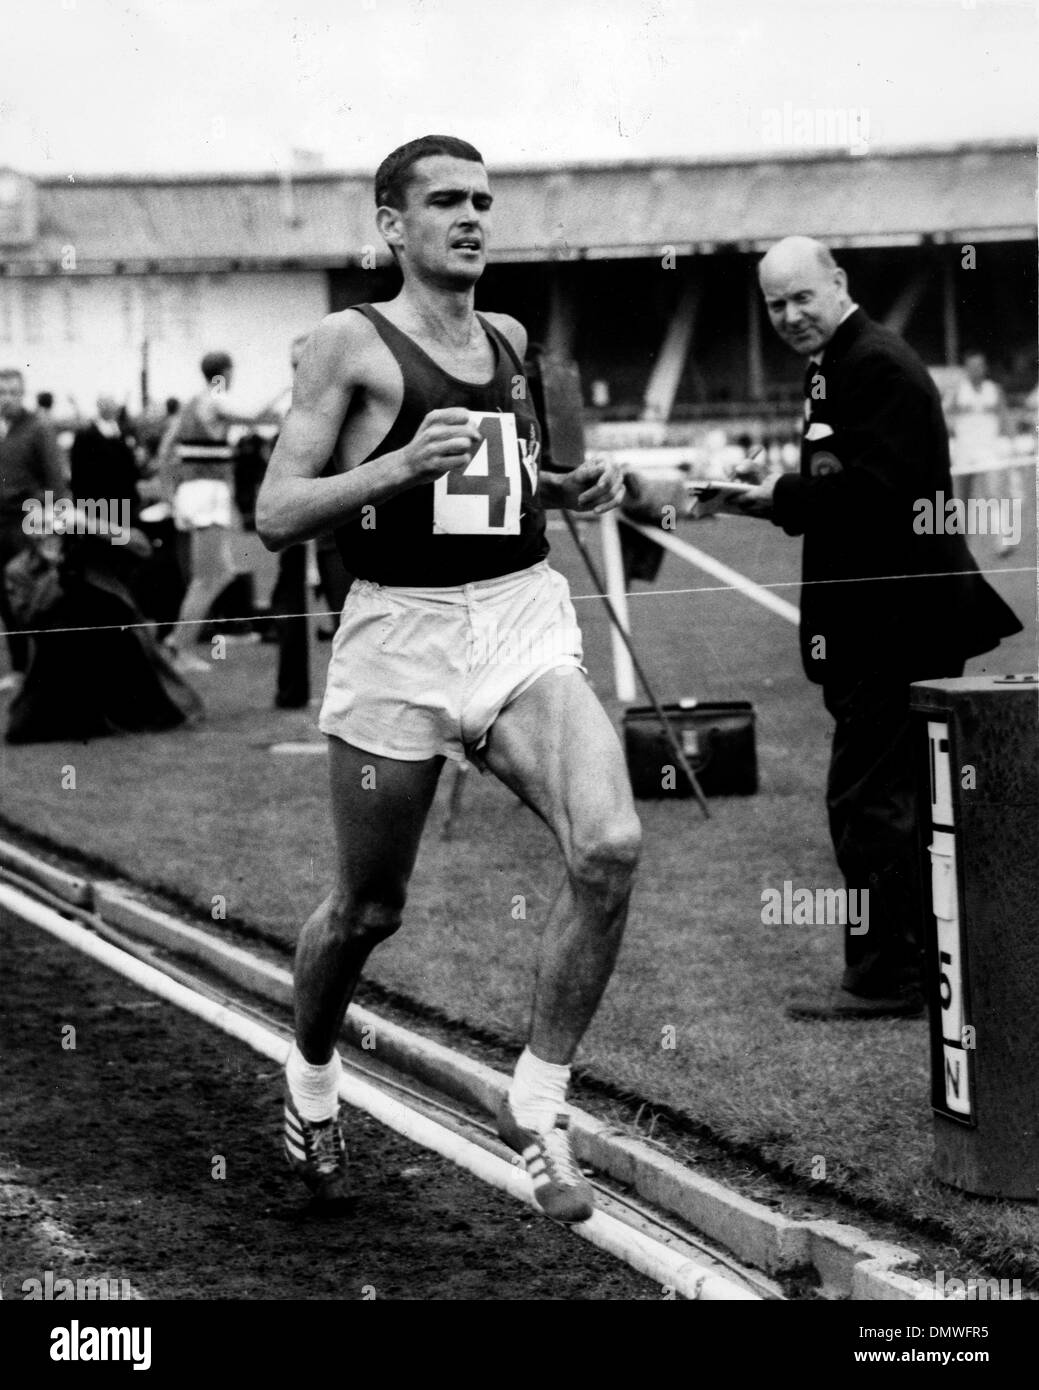 Jul 10, 1965 - London, England, UK - (File Photo) RON CLARKE (Ronald William Clarke) is an Australian athlete, and one of the best known middle and long distance runners of the 1960's. He is best remembered for setting seventeen world records. He won the bronze medal in the 10,000 m at the 1964 Summer Olympics, but never won an Olympic gold medal. At the 1968 Summer Olympics in Mex Stock Photo